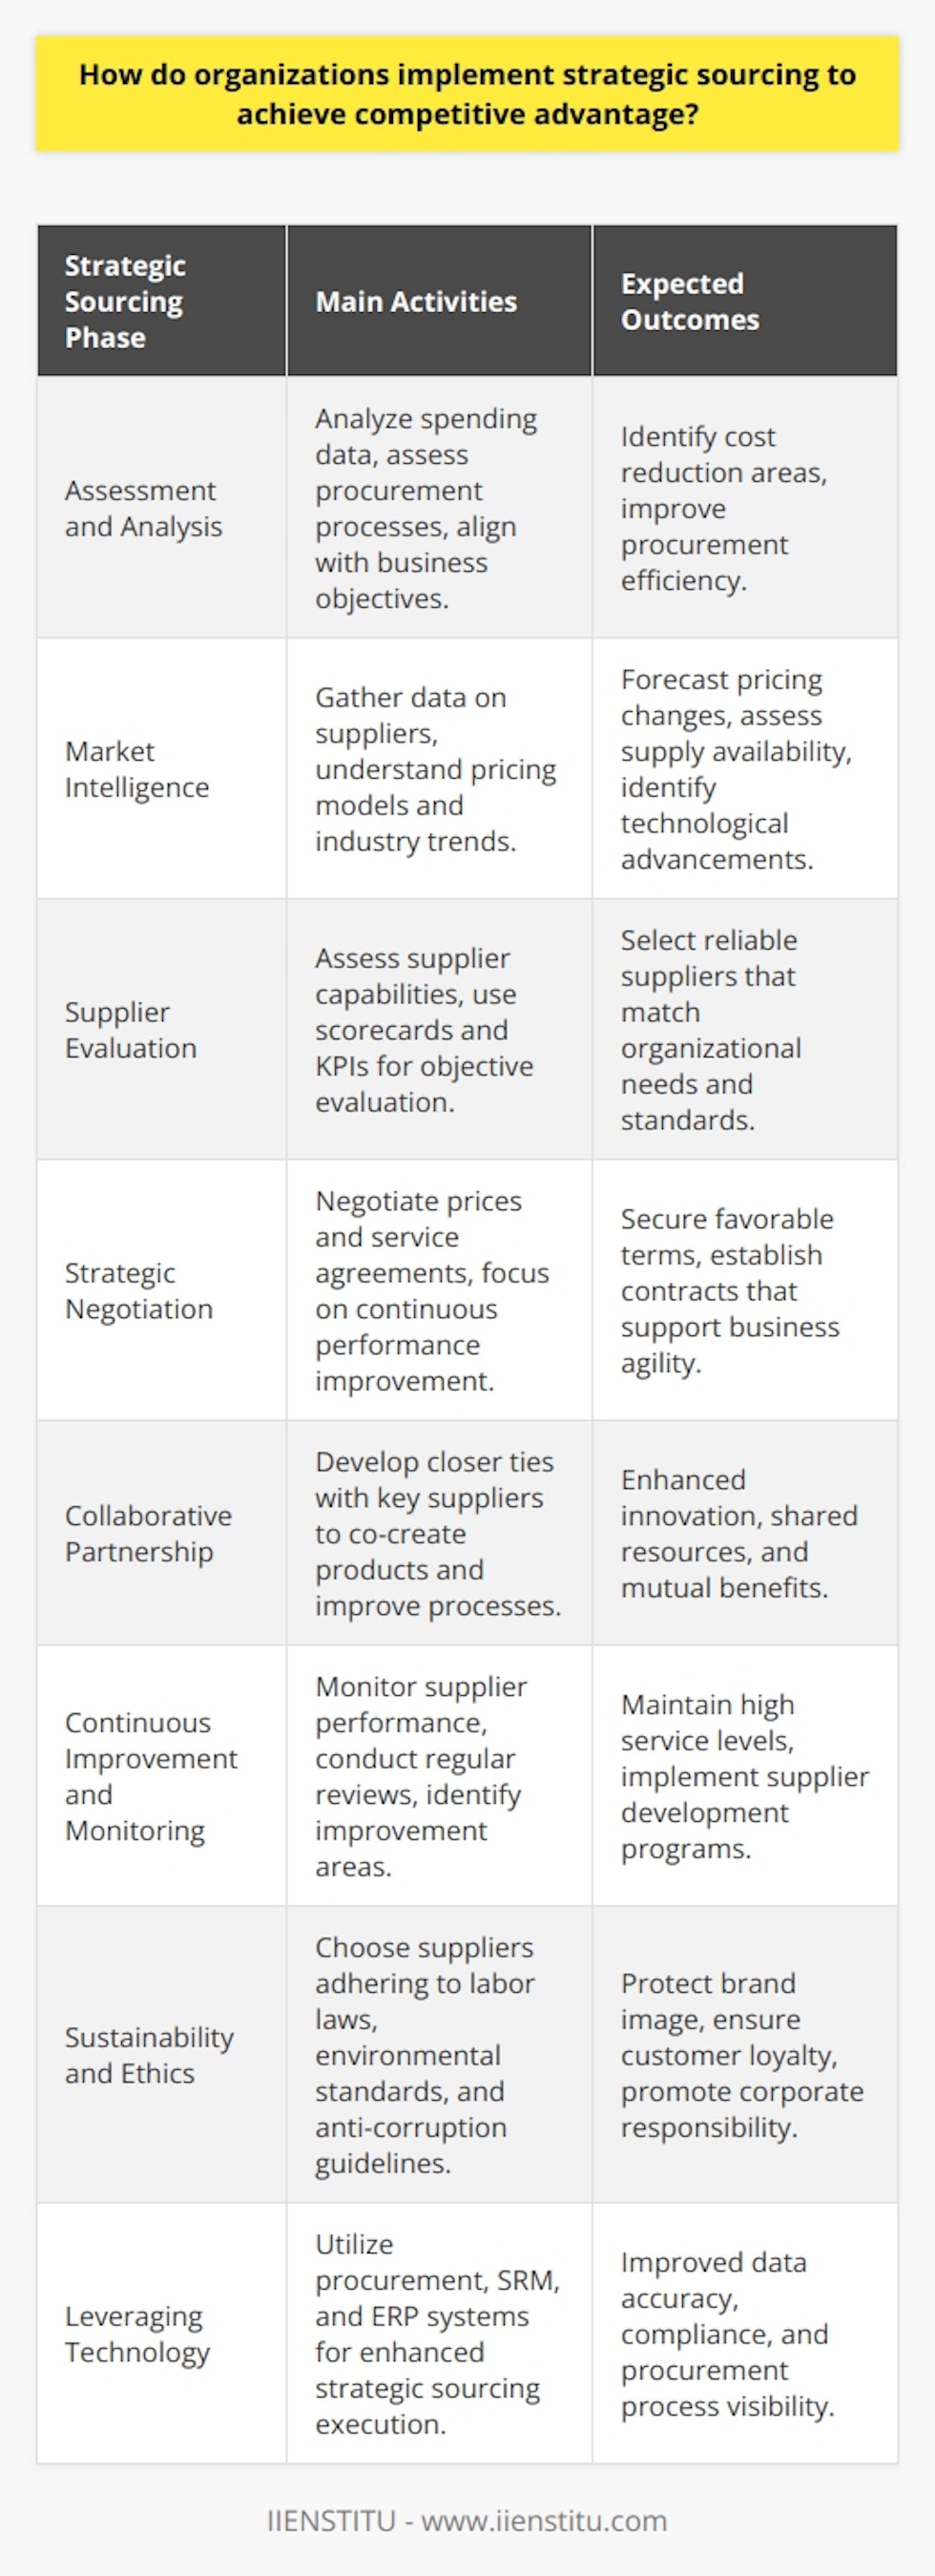 Strategic sourcing is a procurement process that connects data collection, spend analysis, market research, negotiation, and contracting to achieve sustainable cost reductions, improve efficiency, and enhance supplier relationships. It is a long-term approach to acquiring supplies in a way that leverages the purchasing power of an organization to extract the best possible value from its vendors. Here's how organizations effectively implement strategic sourcing:**Assessment and Analysis**The first step is an internal needs assessment. Organizations analyze historical spending data, current procurement processes, and overall business objectives. The analysis uncovers spending patterns and identifies areas where cost reductions could be achieved or efficiency improved.**Market Intelligence**This involves understanding the current market for various commodities and services. Businesses gather data on suppliers, pricing models, and industry trends. Market intelligence provides the insights needed to forecast changes in pricing, availability of supplies, and the emergence of new technology or processes.**Supplier Evaluation**Potential suppliers are assessed to determine their ability to meet the organization's needs. Factors such as financial health, quality assurance, delivery capabilities, service levels, and the ability to innovate are taken into consideration. Companies employ scorecards and key performance indicators (KPIs) to objectively evaluate and select suppliers.**Strategic Negotiation**Negotiation is central to strategic sourcing. Organizations negotiate prices, but they also focus on service agreements, contracts that facilitate continuous performance improvement, and clauses that provide flexibility to accommodate changing business needs.**Collaborative Partnership**Instead of transactional relationships, strategic sourcing promotes collaborative partnerships with key suppliers. Businesses work closely with suppliers to co-develop products or improve processes, leading to mutual benefits through shared know-how and resources.**Continuous Improvement and Monitoring**Once suppliers are selected, the relationship and performance are continuously monitored. Regular performance reviews, adherence to service level agreements, and identification of opportunities for ongoing improvements are crucial. The implementation of supplier development programs also falls within this area.**Sustainability and Ethics**An increasing number of organizations are embedding principles of sustainability and corporate social responsibility into their strategic sourcing plans. This involves choosing suppliers that are compliant with international labor laws, environmental standards, and anti-corruption policies — factors that are ever more important in protecting brand image and customer loyalty.**Leveraging Technology**While not a direct step in the sourcing process, the leverage of technological tools can greatly enhance sourcing efforts. Systems for procurement, supplier relationship management (SRM), and enterprise resource planning (ERP) are important in executing a strategic sourcing strategy. The adoption of these systems improves data accuracy, ensures compliance, and allows for real-time visibility across the entire procurement process.Incorporating strategic sourcing within organizational practices helps in building a supply chain that is both resilient and responsive to the market's and the company's changing needs. While the initial focus may be on cost, the long-term advantages often include innovation contribution, risk management, and the improvement of product and service quality — all of which are vital components in maintaining a competitive edge in today’s global marketplace.